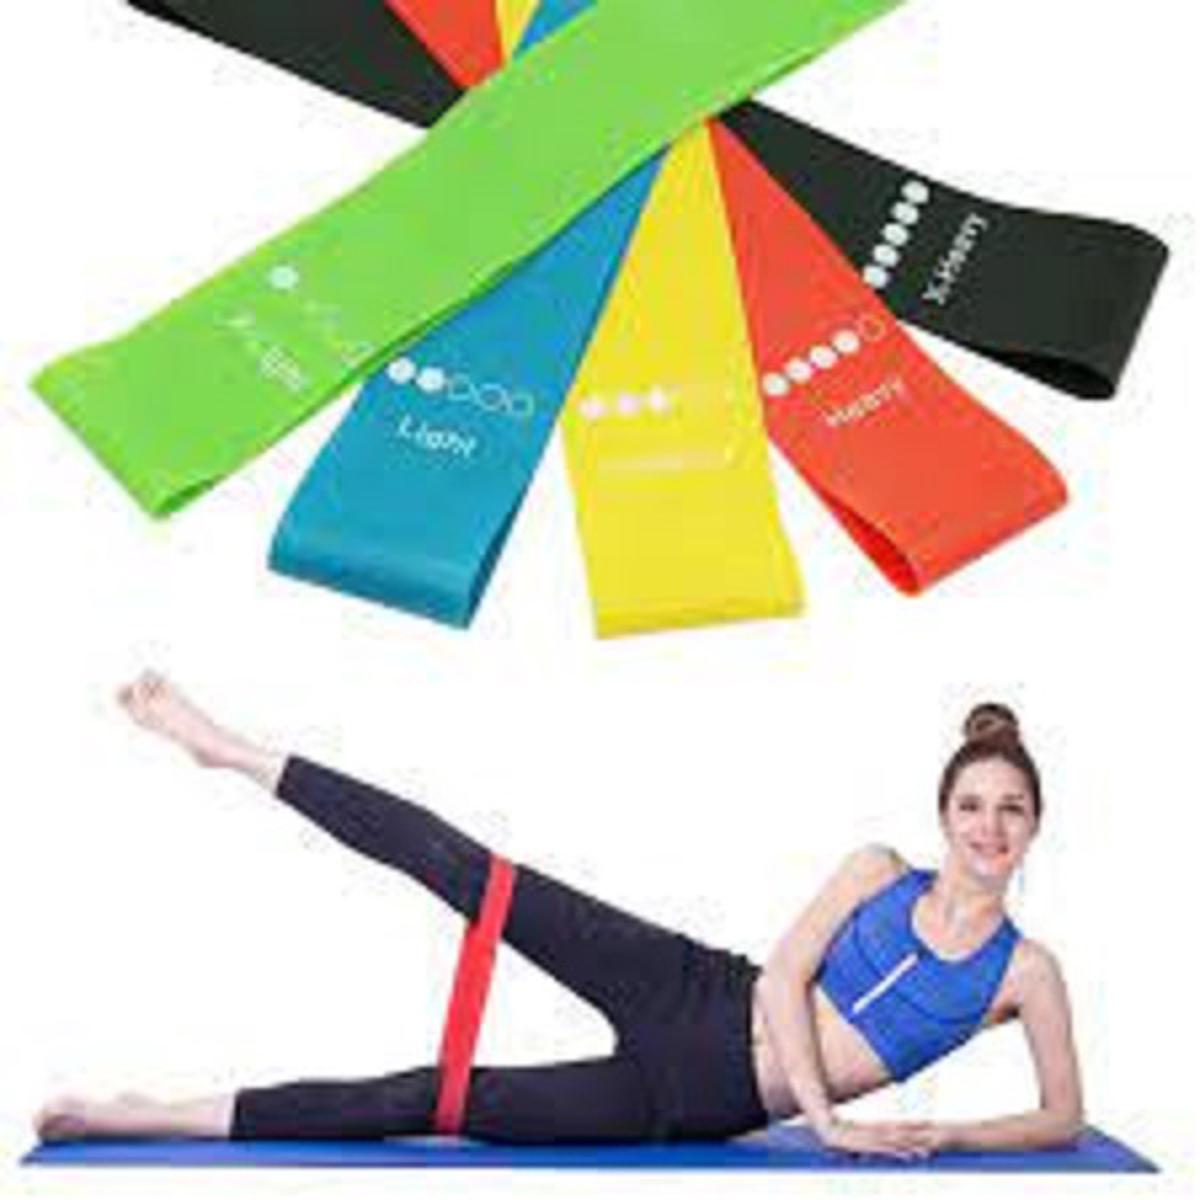 Pack of 5 Resistance Loop Exercise Rubber elastic Bands for Yoga